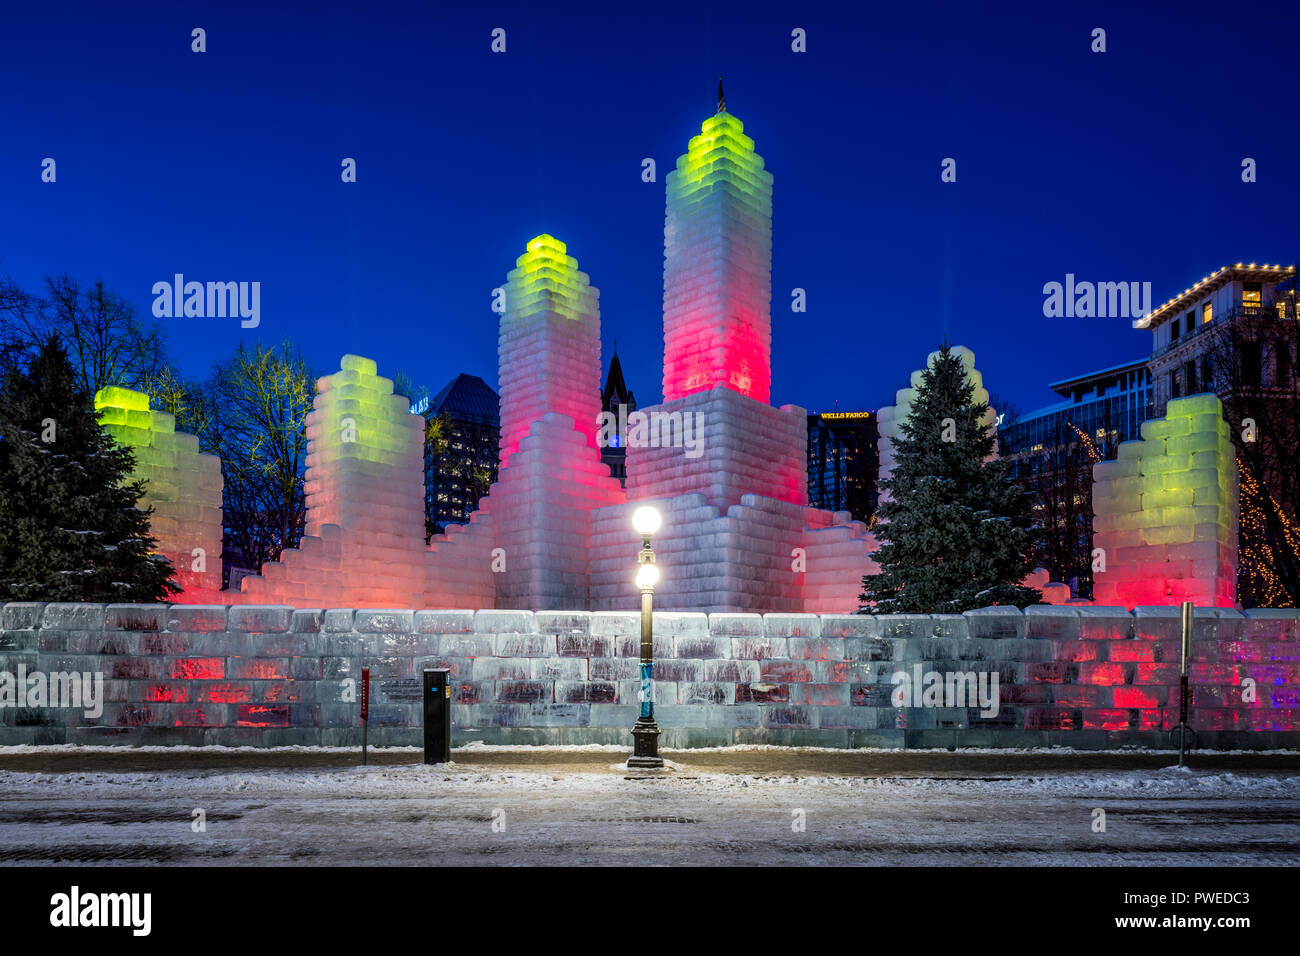 2018 Saint Paul Winter Carnival Ice Palace with red and yellow lighting. The ice palace was built in Rice Park downtown St. Paul, Minnesota. Stock Photo